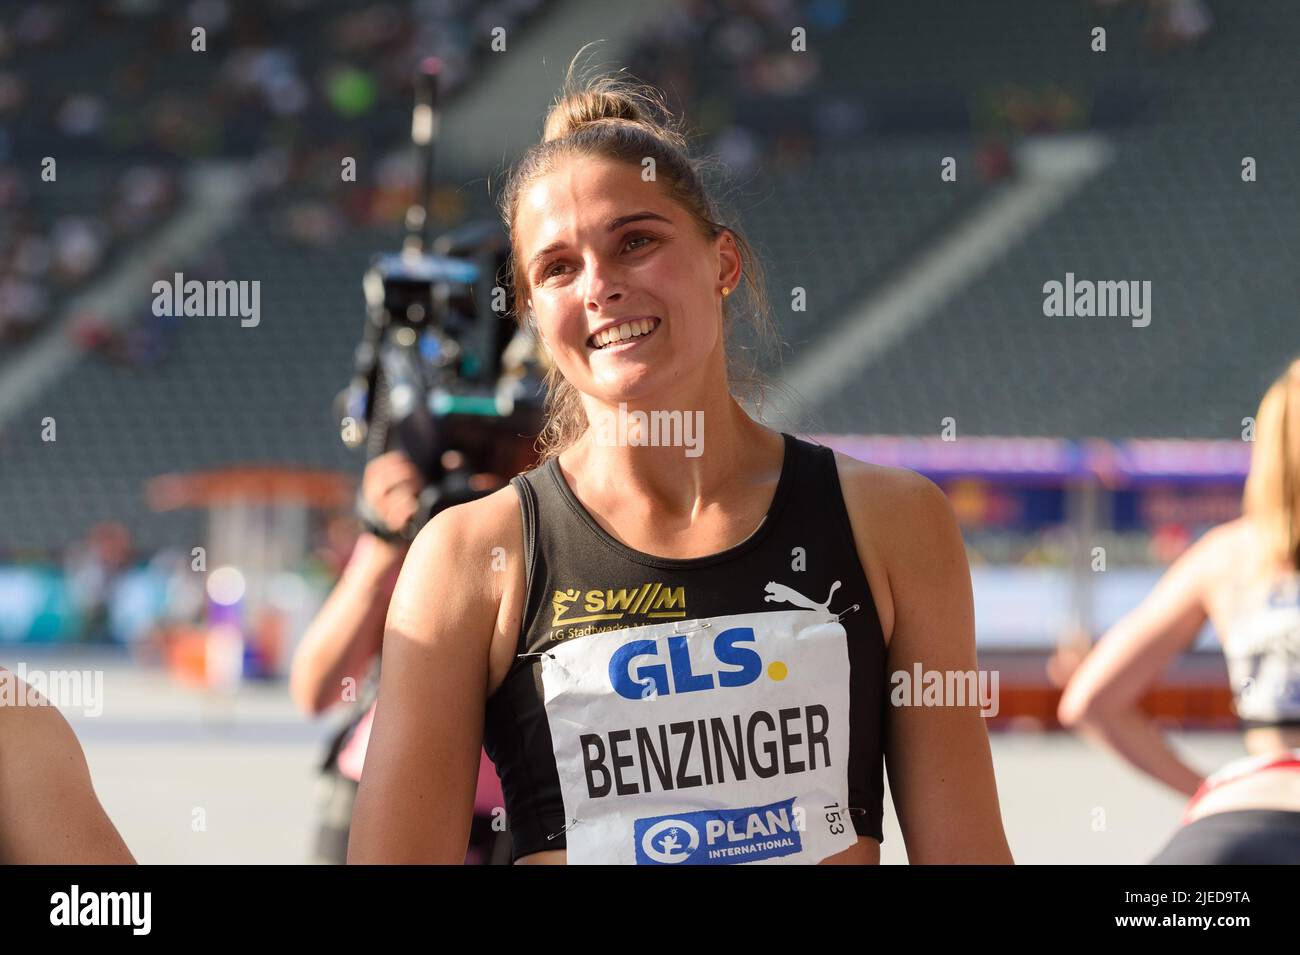 Tina Benzinger (LG Stadtwerke München) after the 200 metre final during the 2022 athletic German championship finals at Olympiastadion, Berlin.  Sven Beyrich/SPP Stock Photo